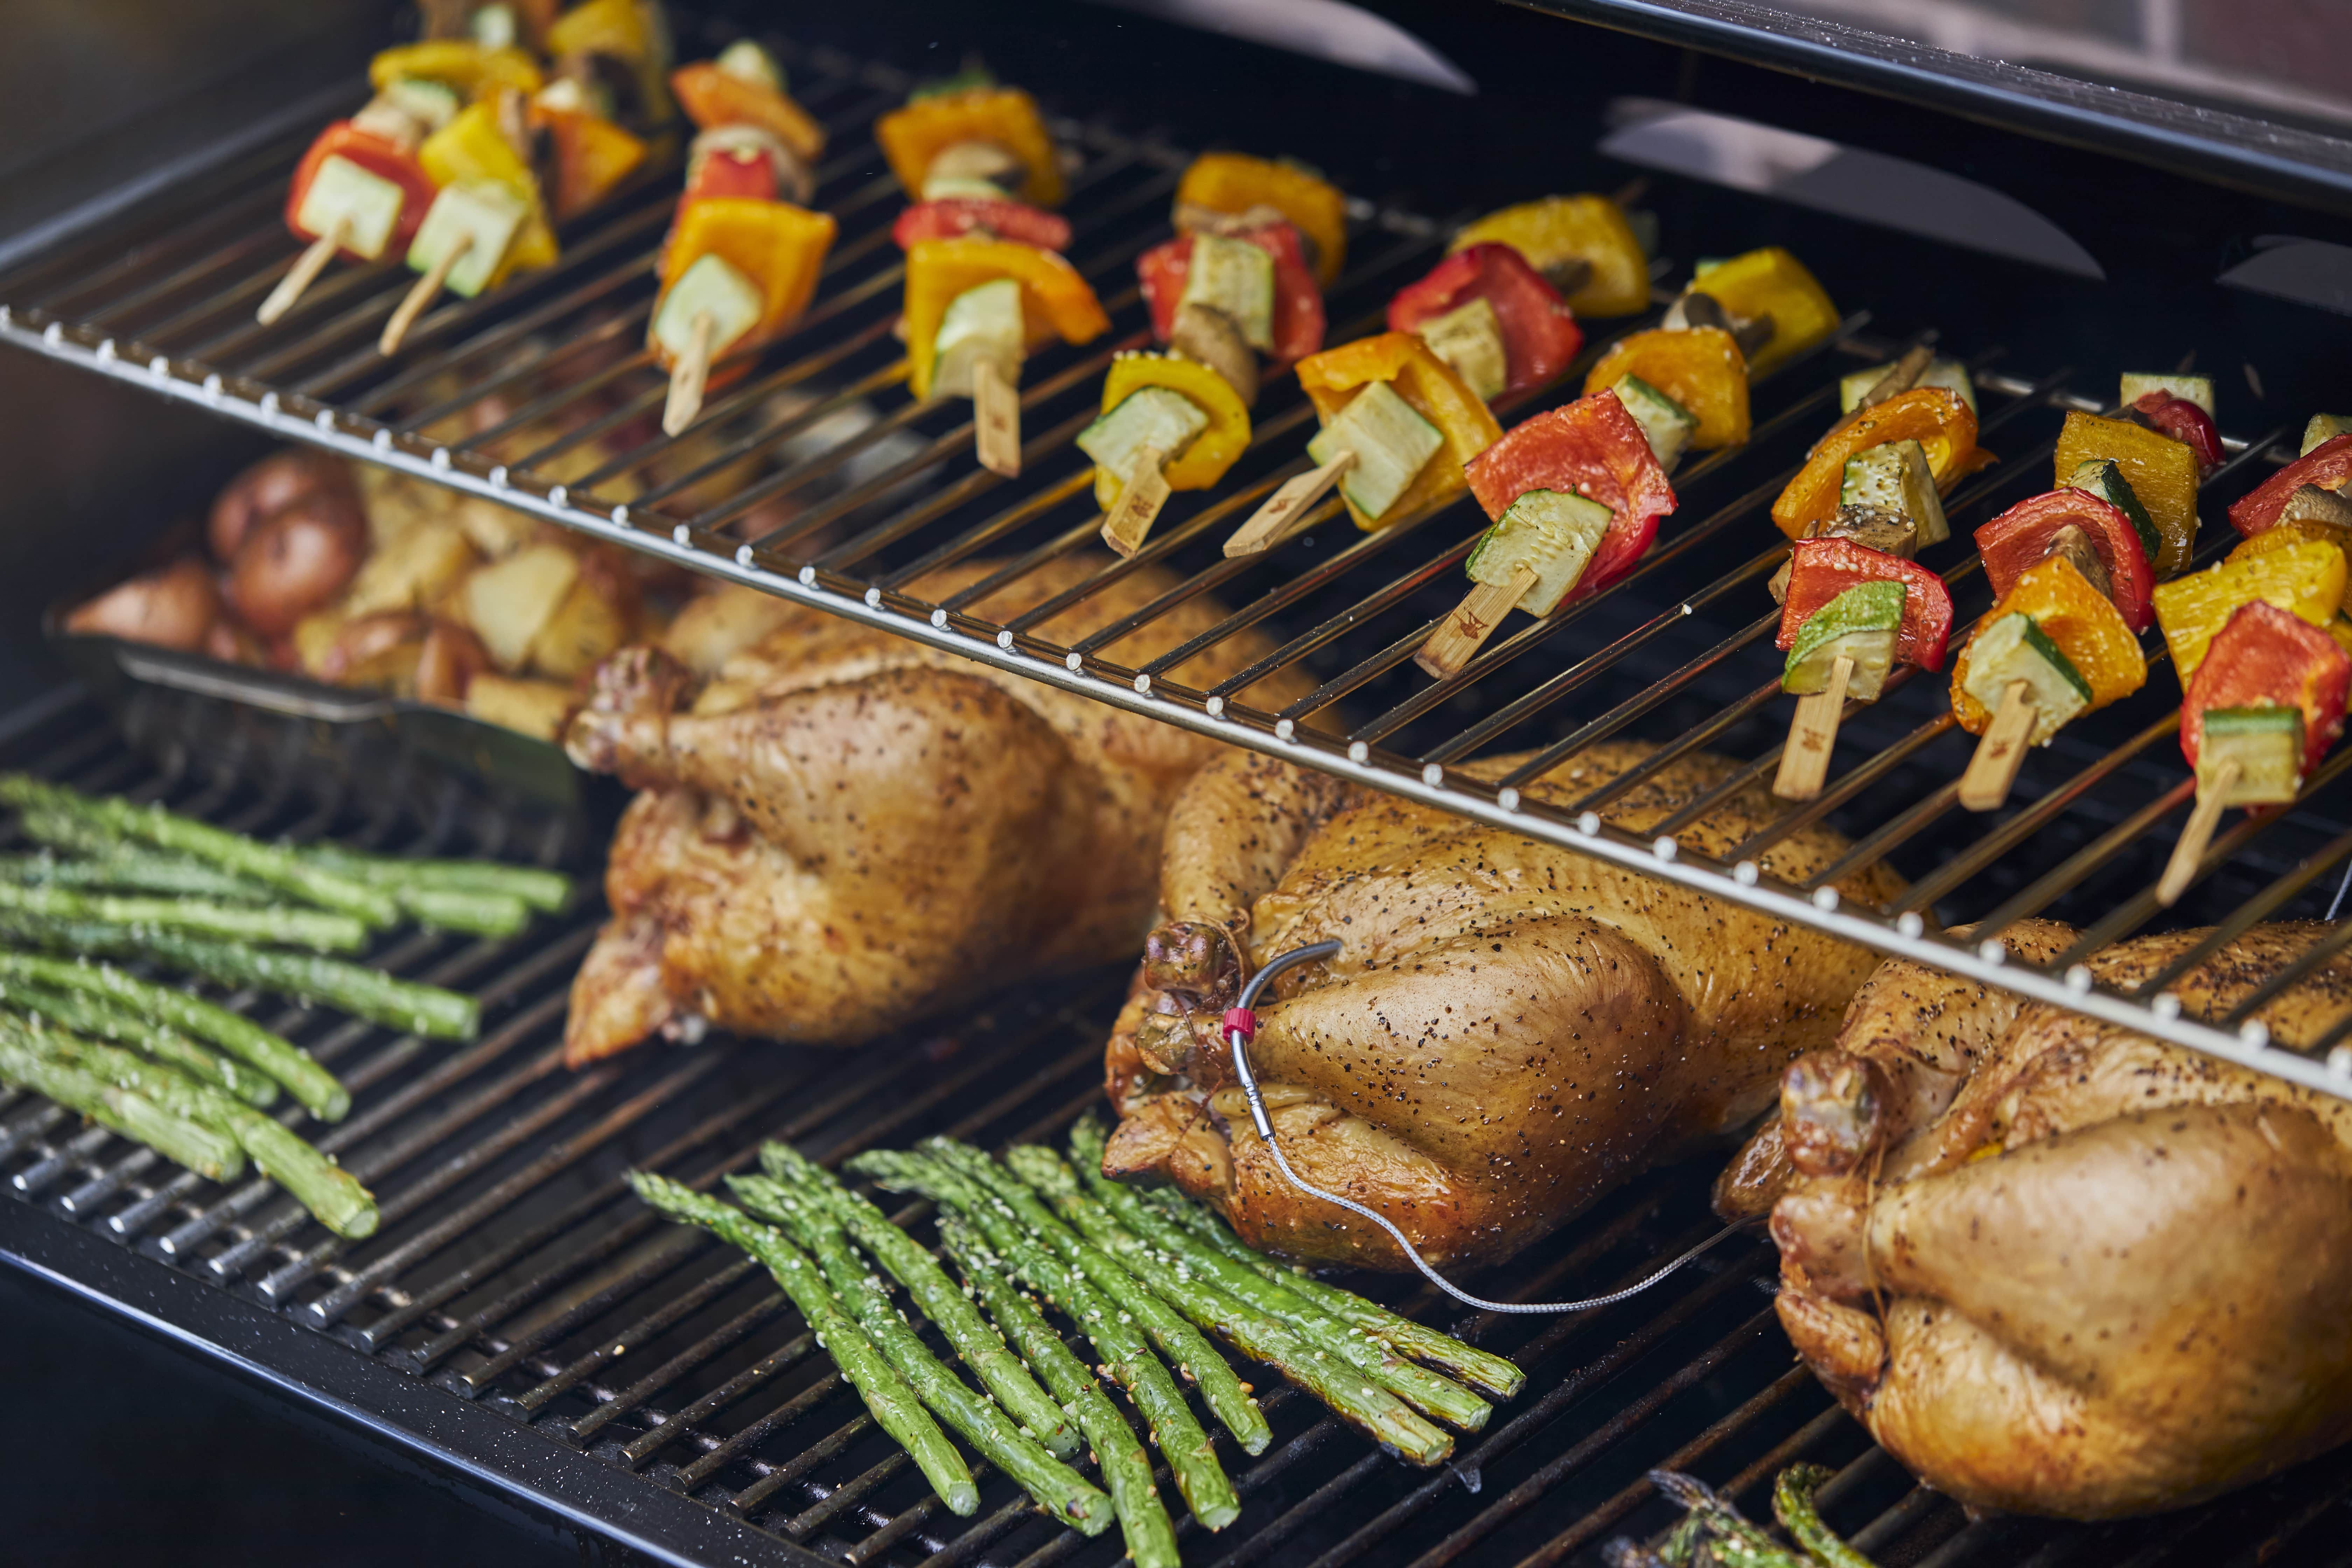 These Smart-Gas-Grill Will Make A No-Brainer